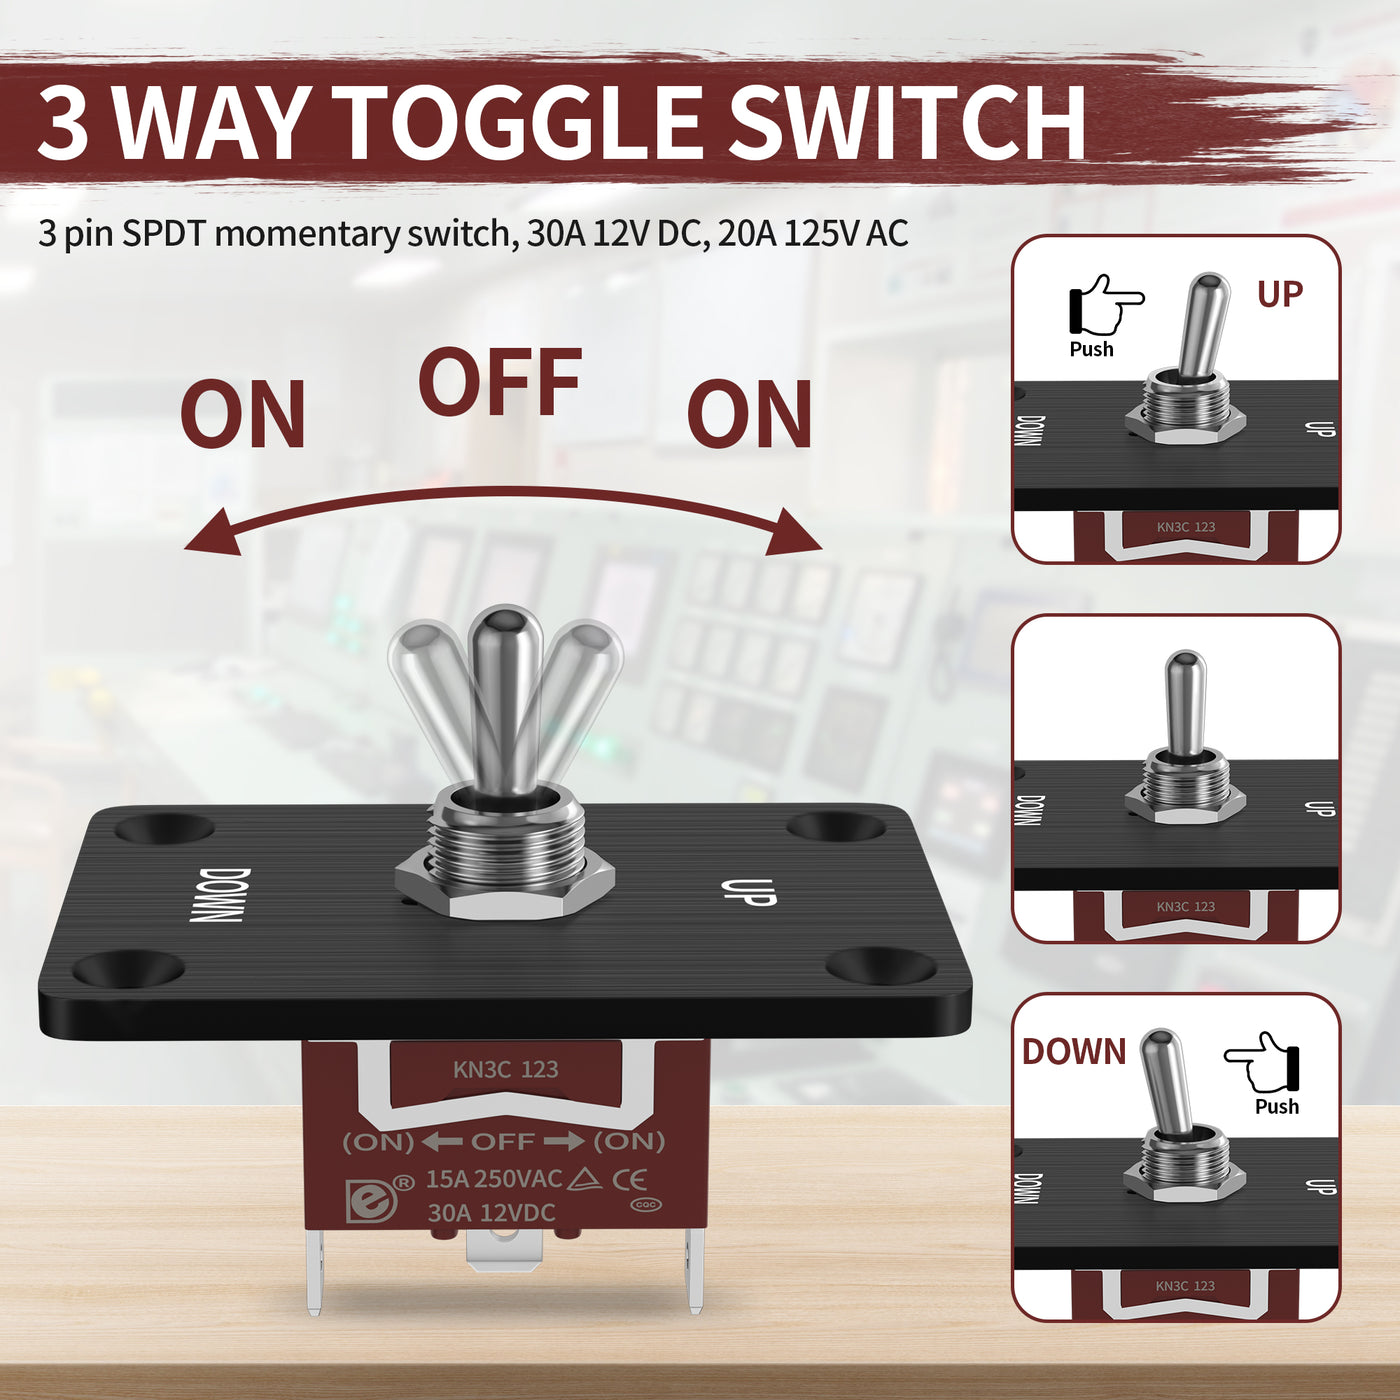 30A 12VDC SPDT 3 Way Momentary Toggle Switch with Plate and Cover